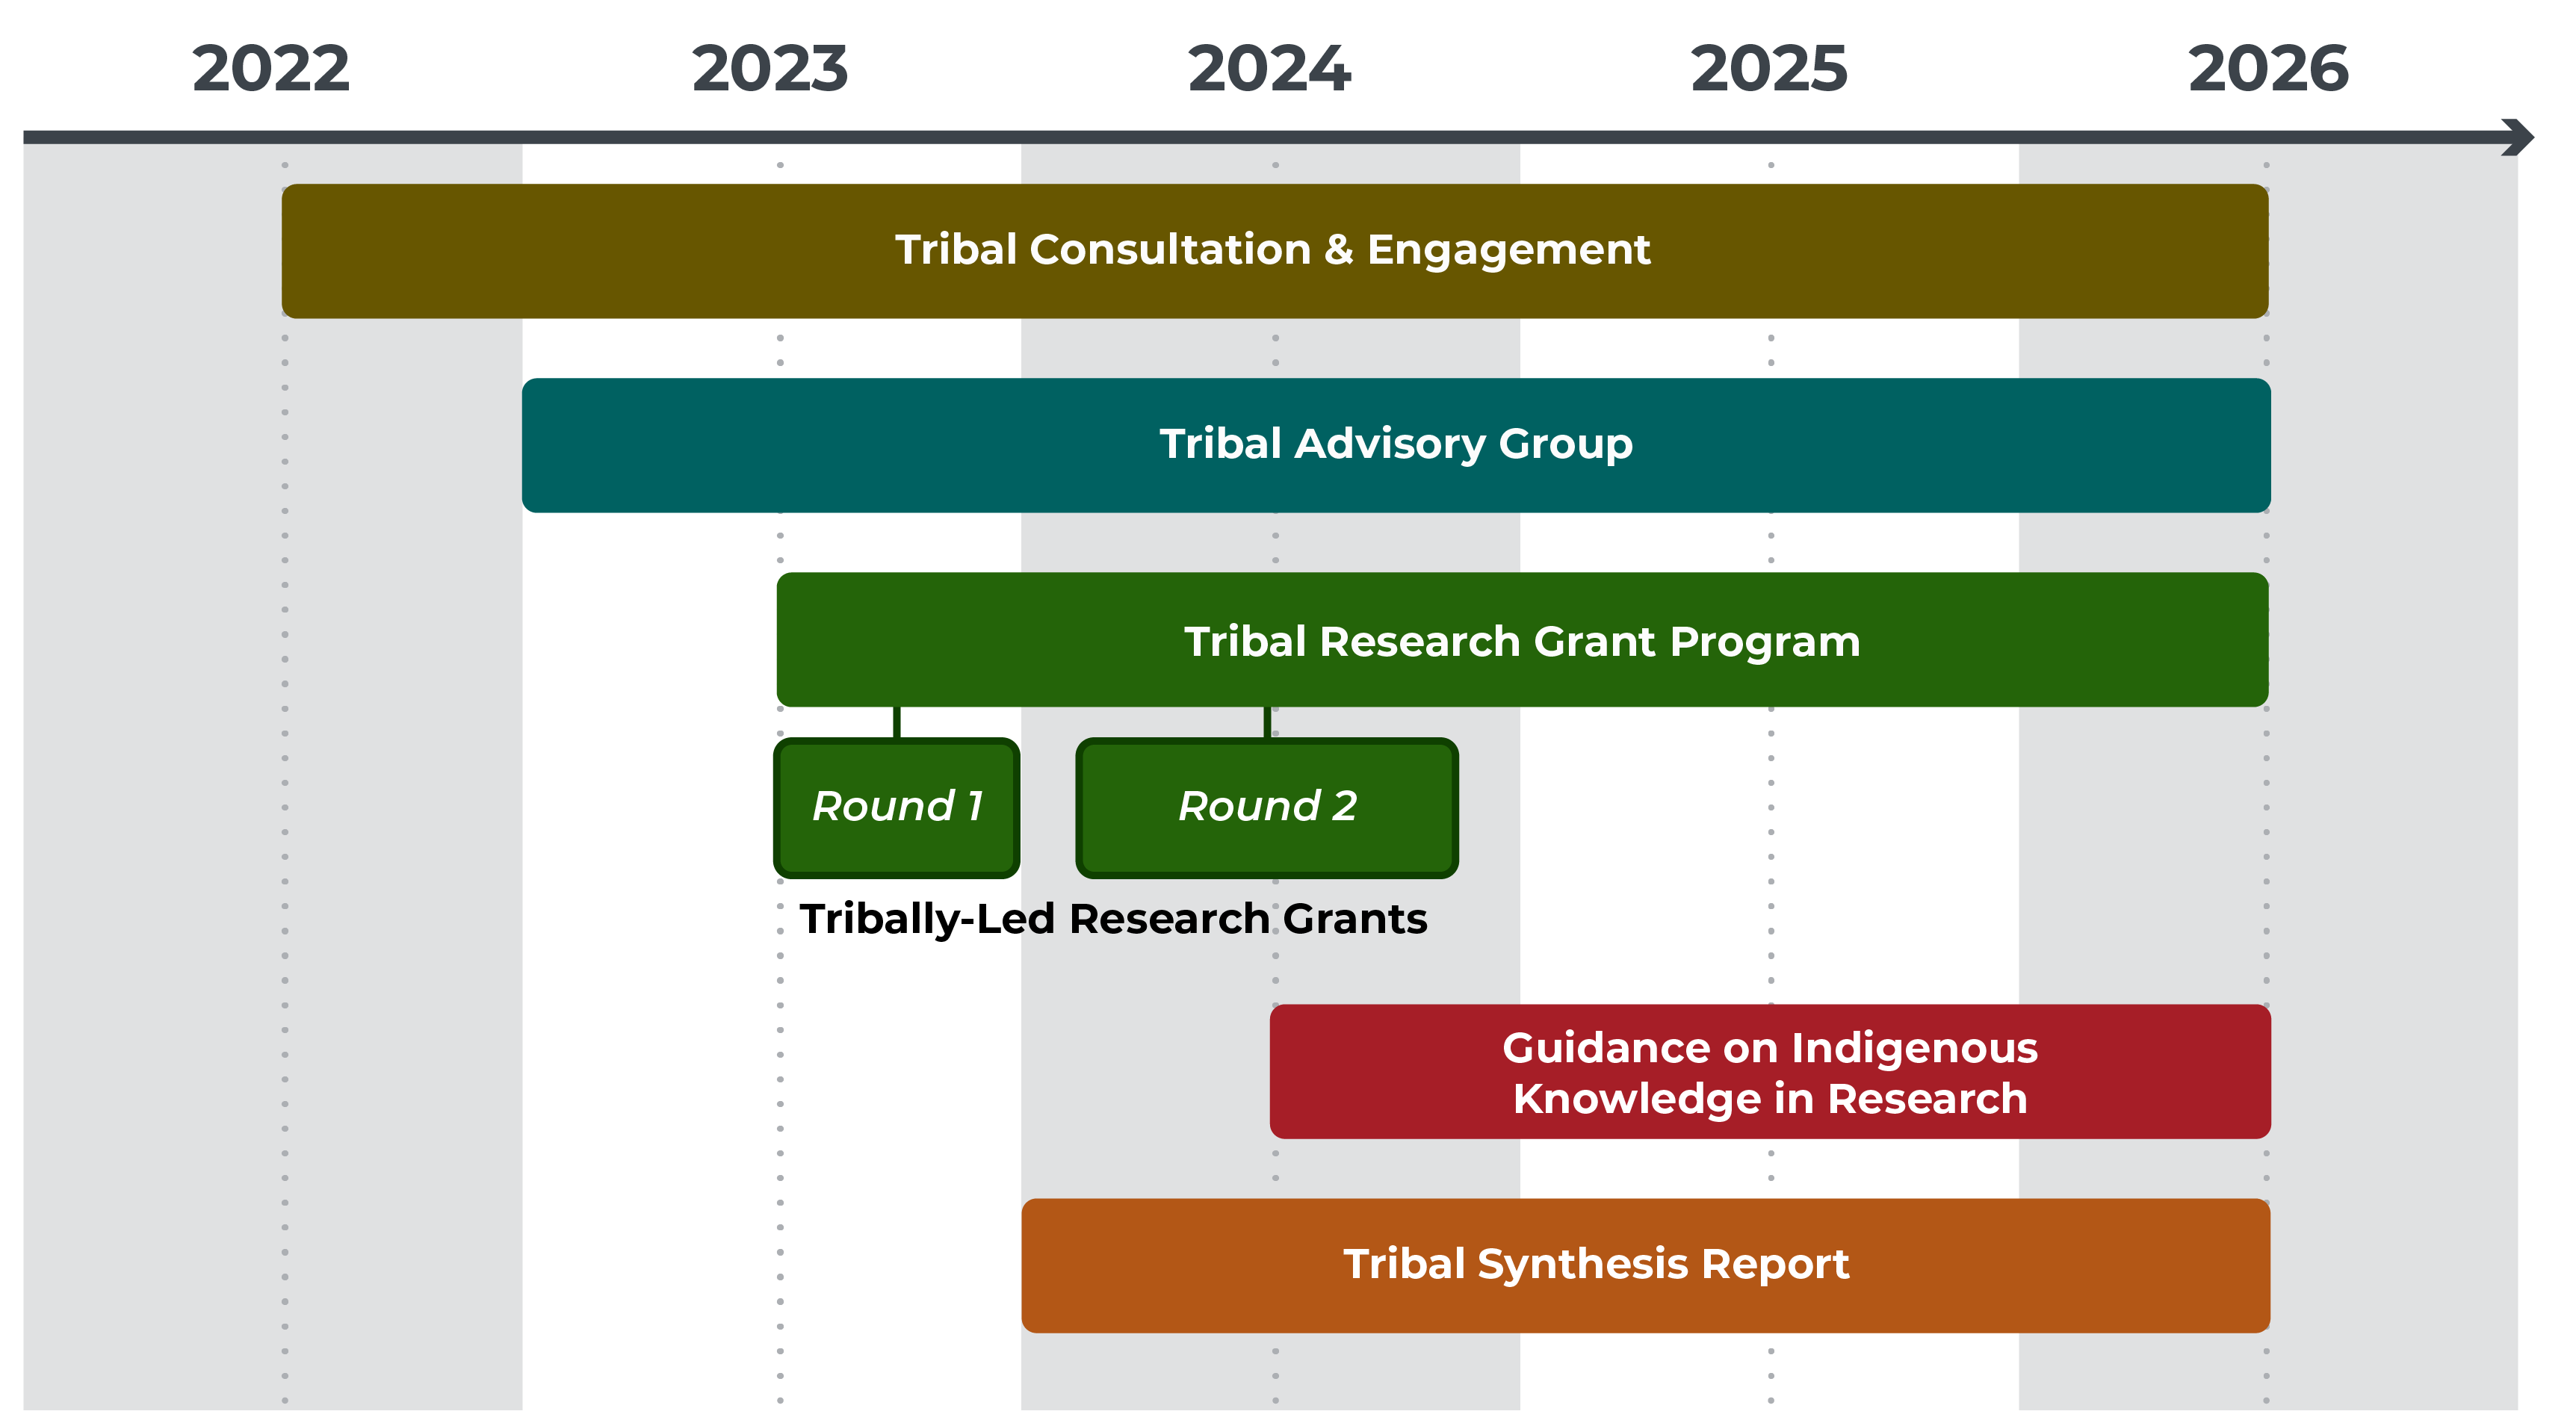 Graphic showing engagement timeline. Tribal Consultation and Engagement from mid 2022 to mid 2026. Tribal Advisory Group from 2023 to mid 2026. Tribal Research Grant Program from mid 2023 to mid 2026, with Tribally-led Research Grants with Round 1 from mid 2023 to end of 2023, and Round 2 from early 2024 to fall 2024. Guidance on Indigenous Knowledge in Research from mid 2024 to mid 2026. And Tribal Synthesis Report from 2024 to mid 2026.